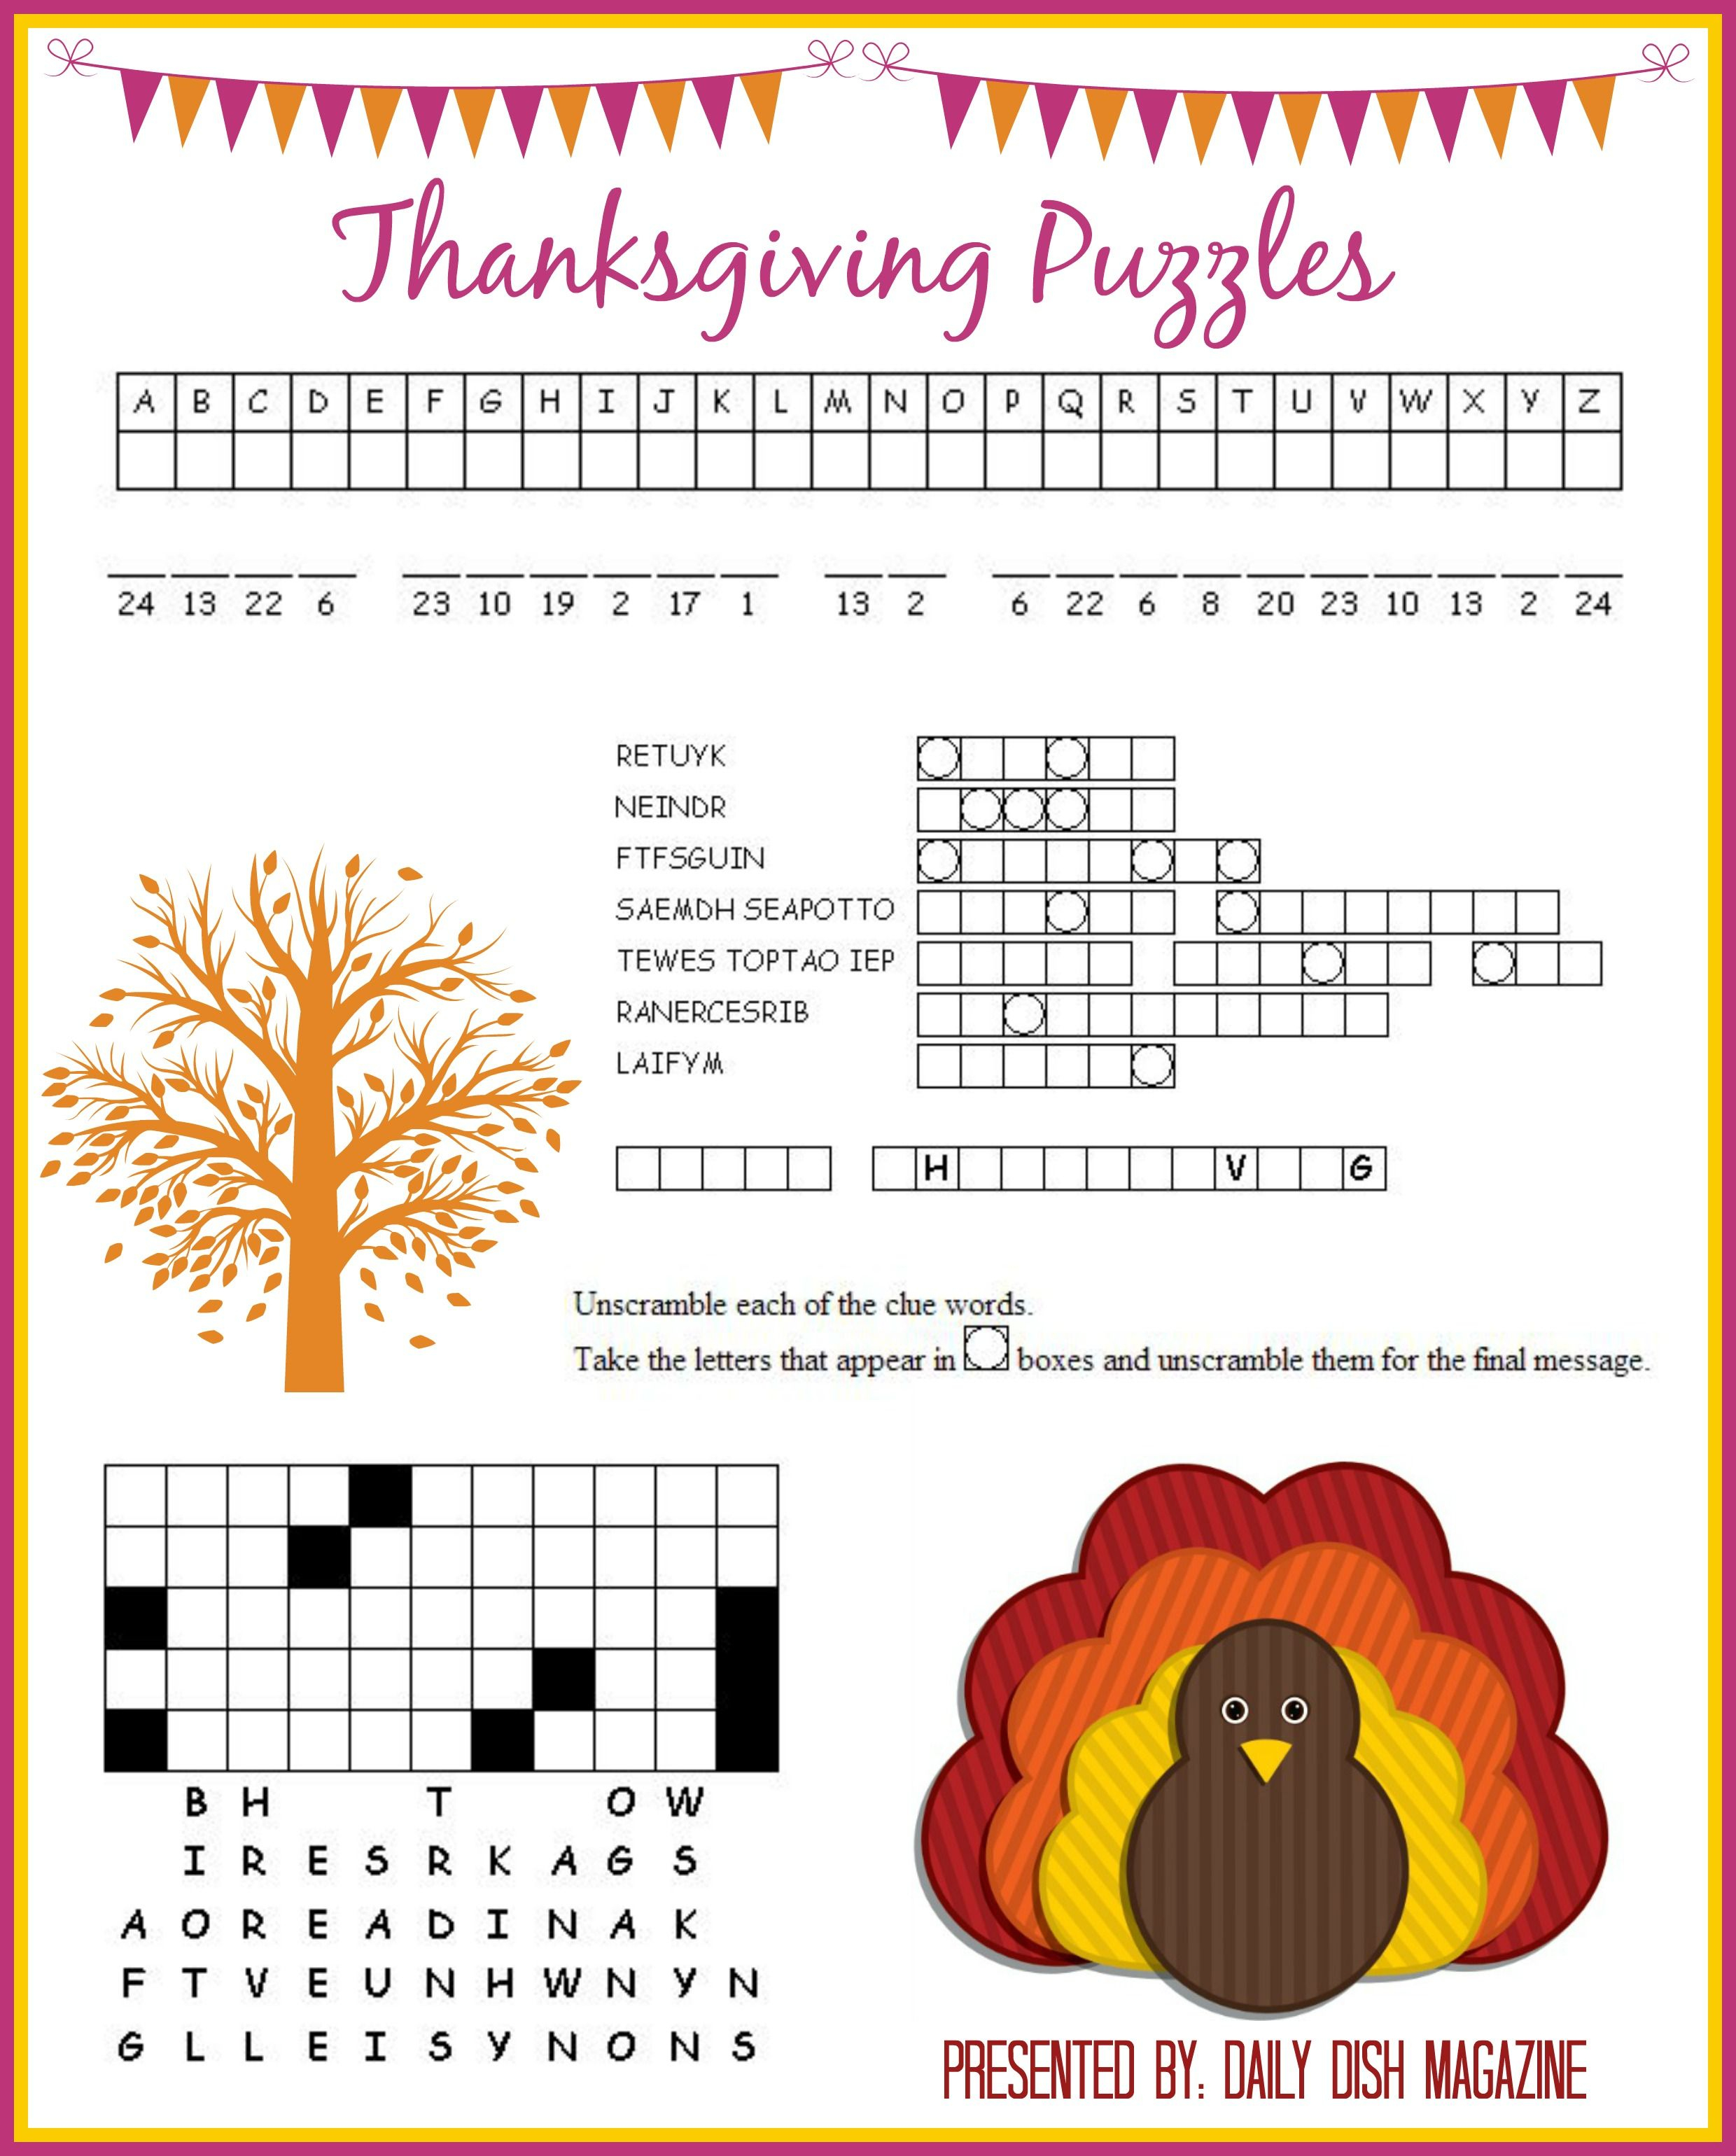 Thanksgiving Puzzles Printables | *holidays We Celebrate - Printable Thanksgiving Puzzles For Adults